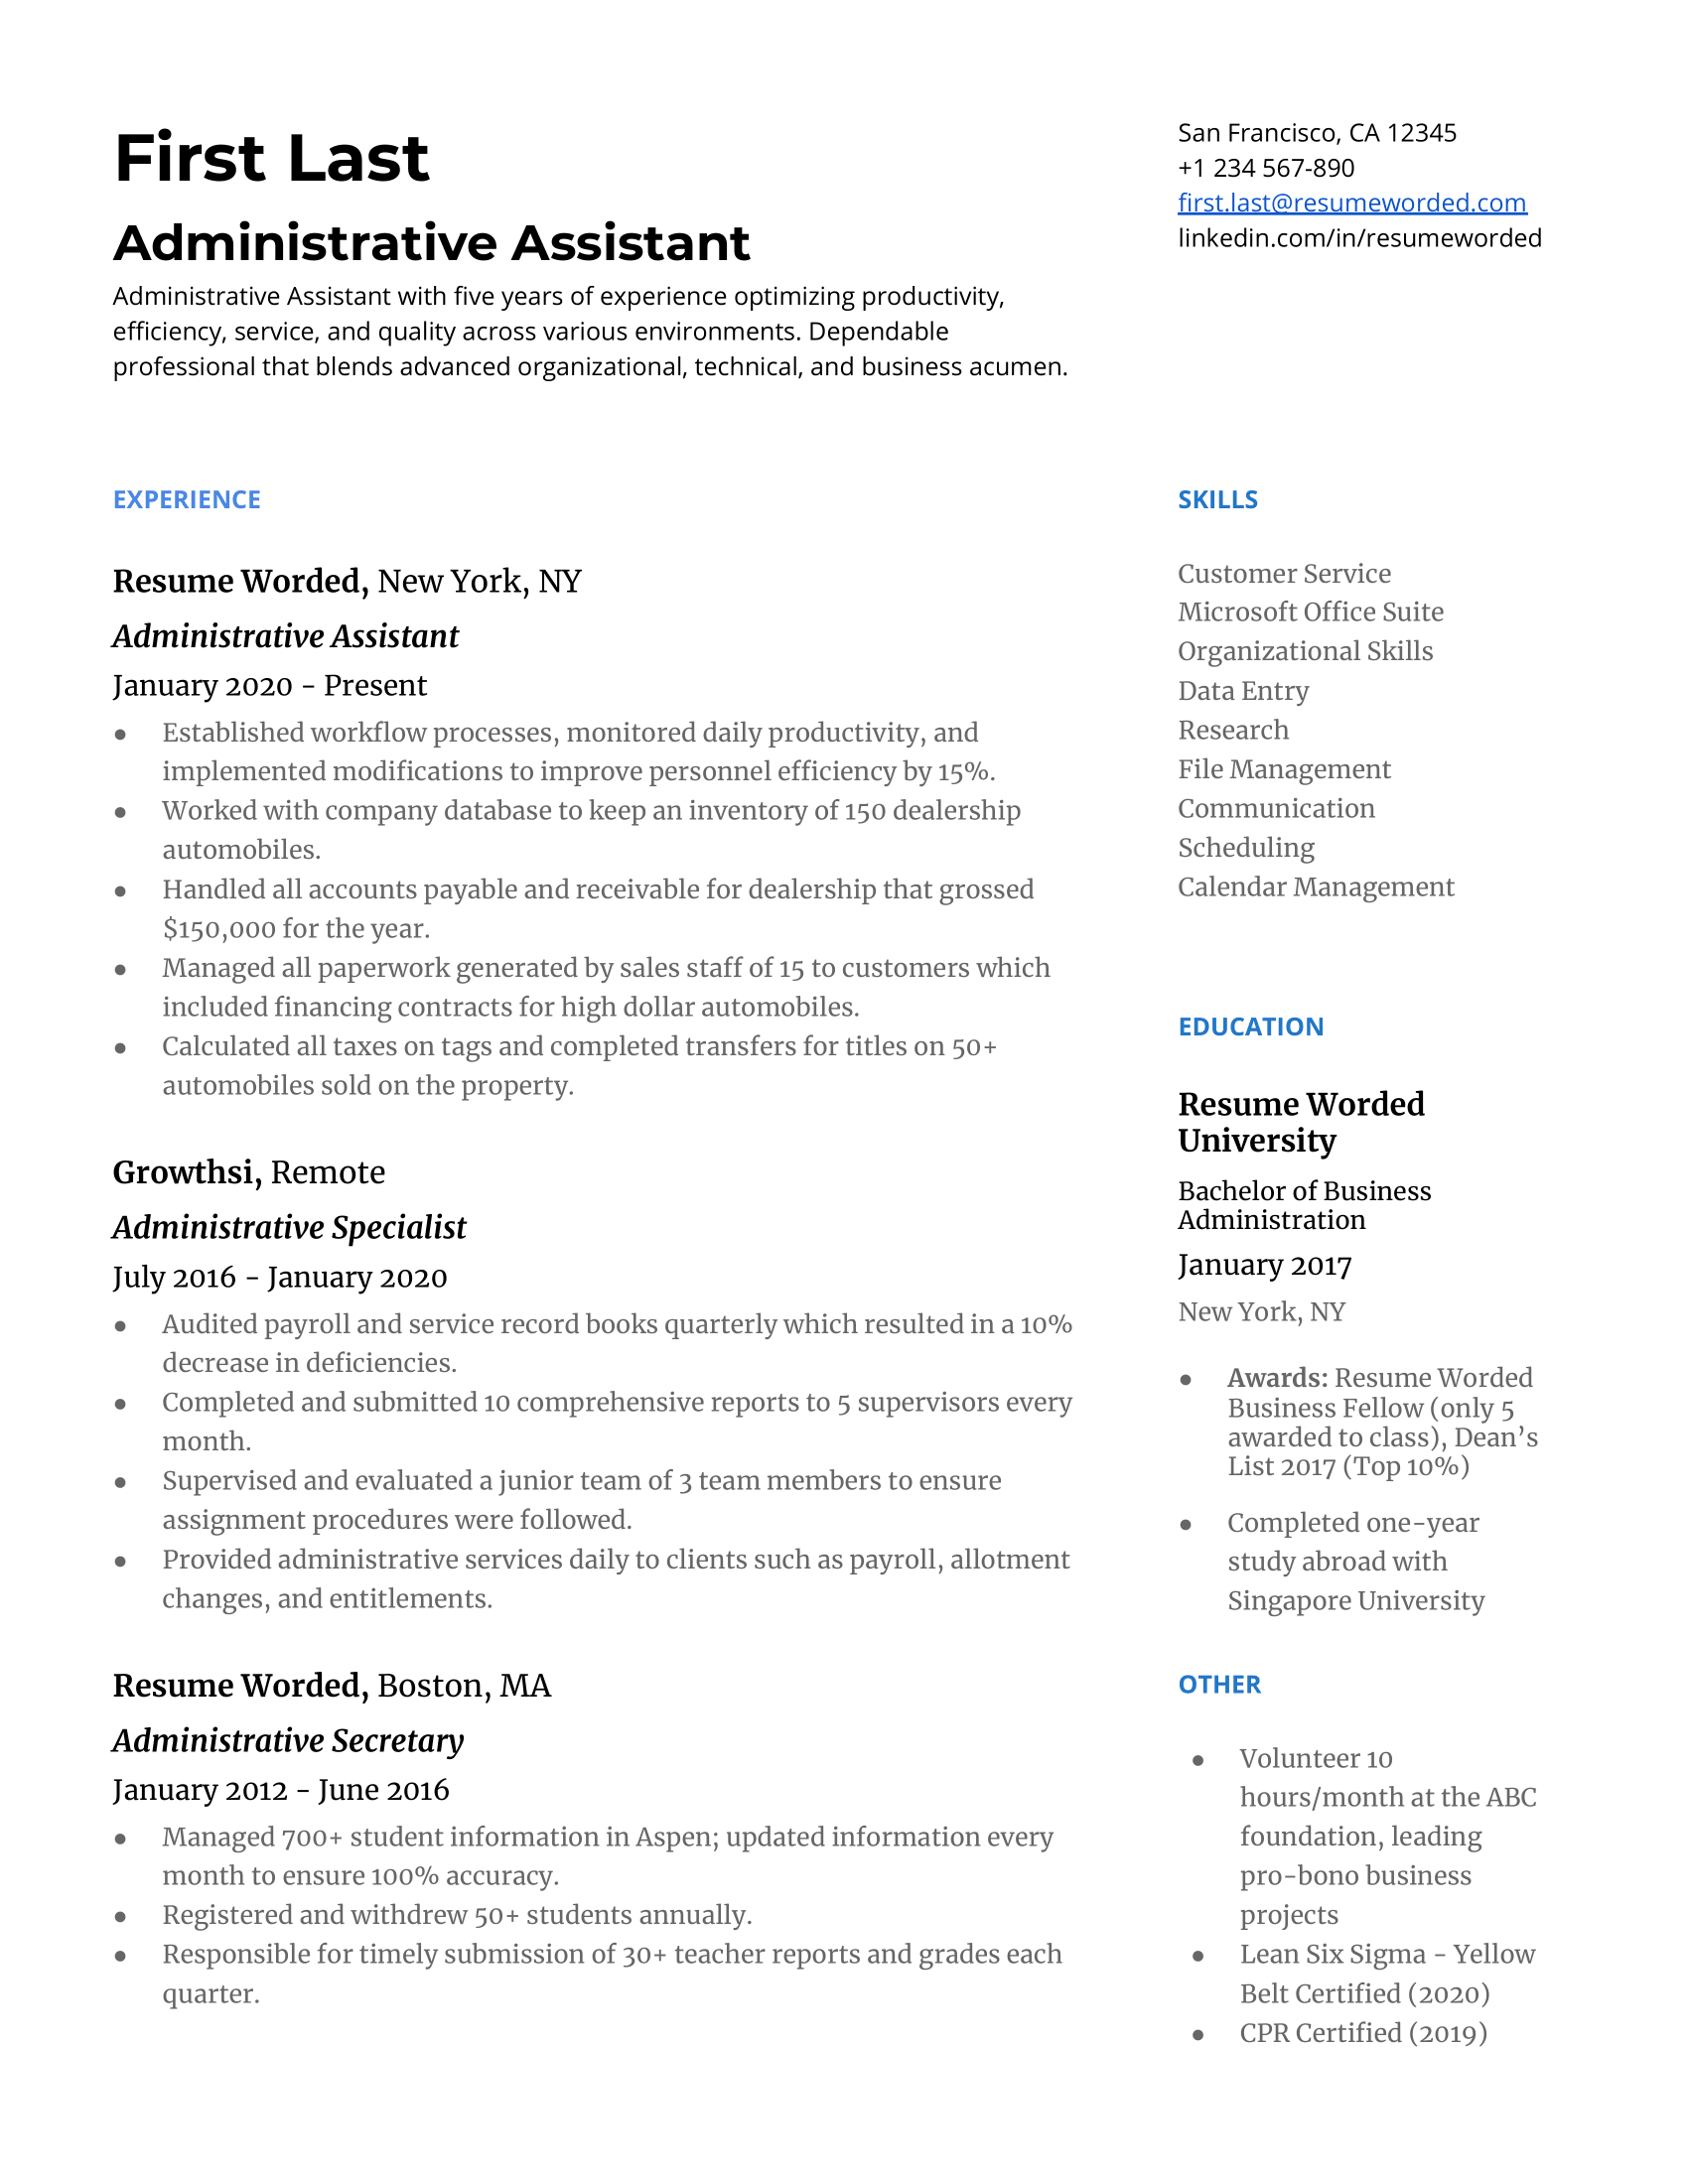 A well-organized CV highlighting technical proficiency and multitasking skills for an Administrative Assistant role.